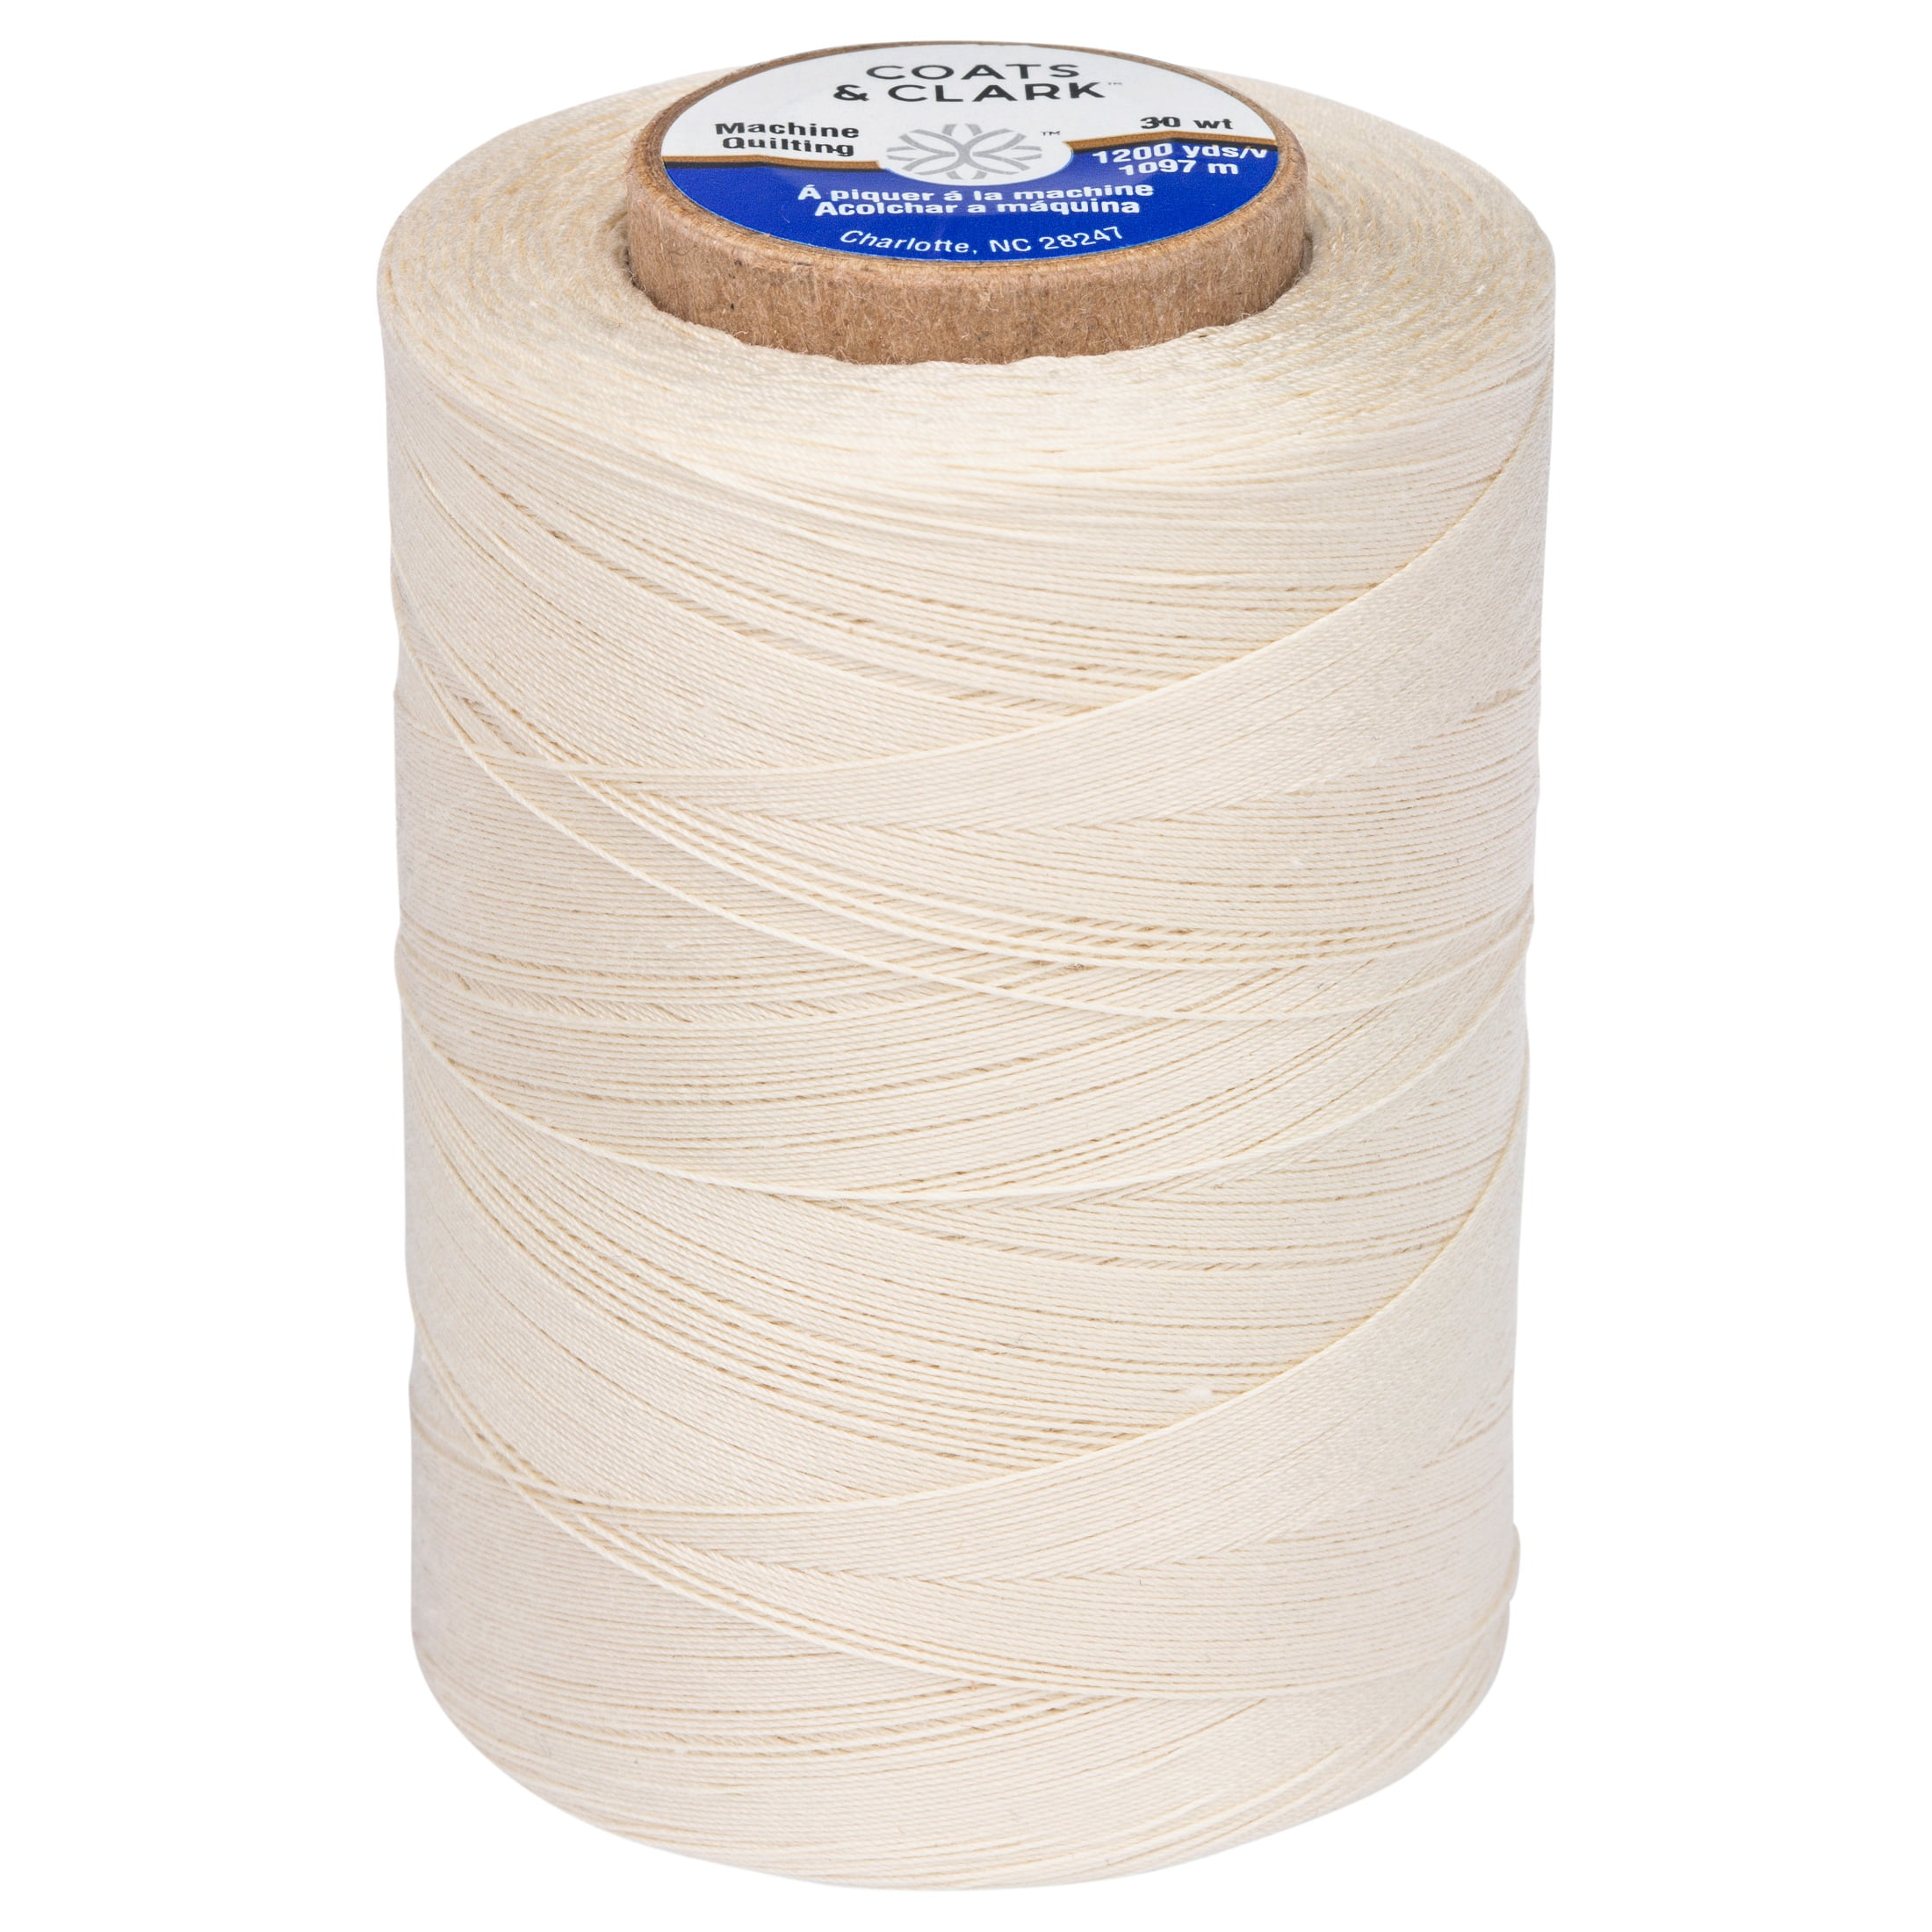 Mandala Crafts Mercerized Cotton Thread for Sewing Machine - 50 WT Cotton  Threads for Quilting Thread - 2400 Yds Beige Thread Cotton Cone Thread for